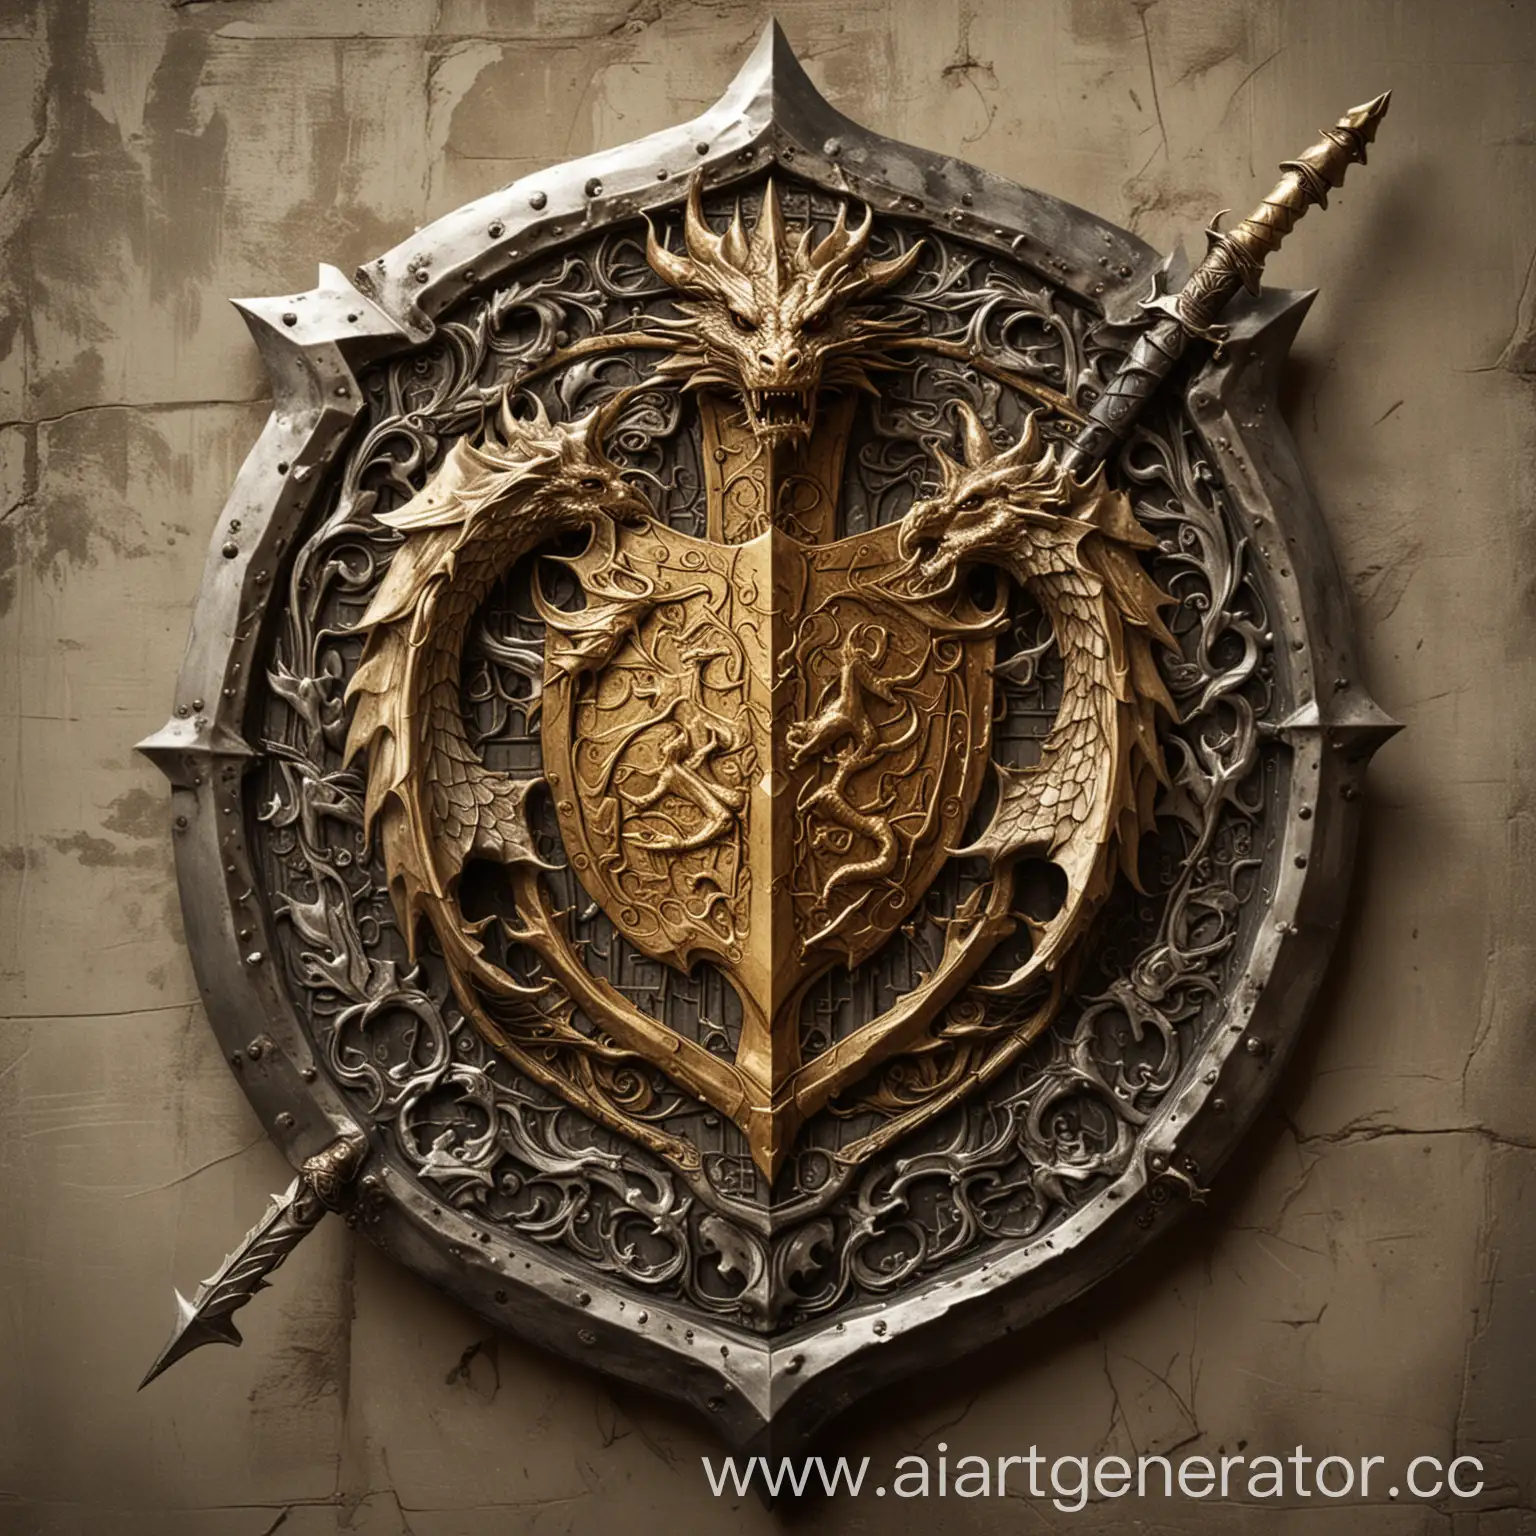 Medieval-Clan-Heraldry-Shield-with-Dragon-Sword-Castle-and-Book-Silhouettes